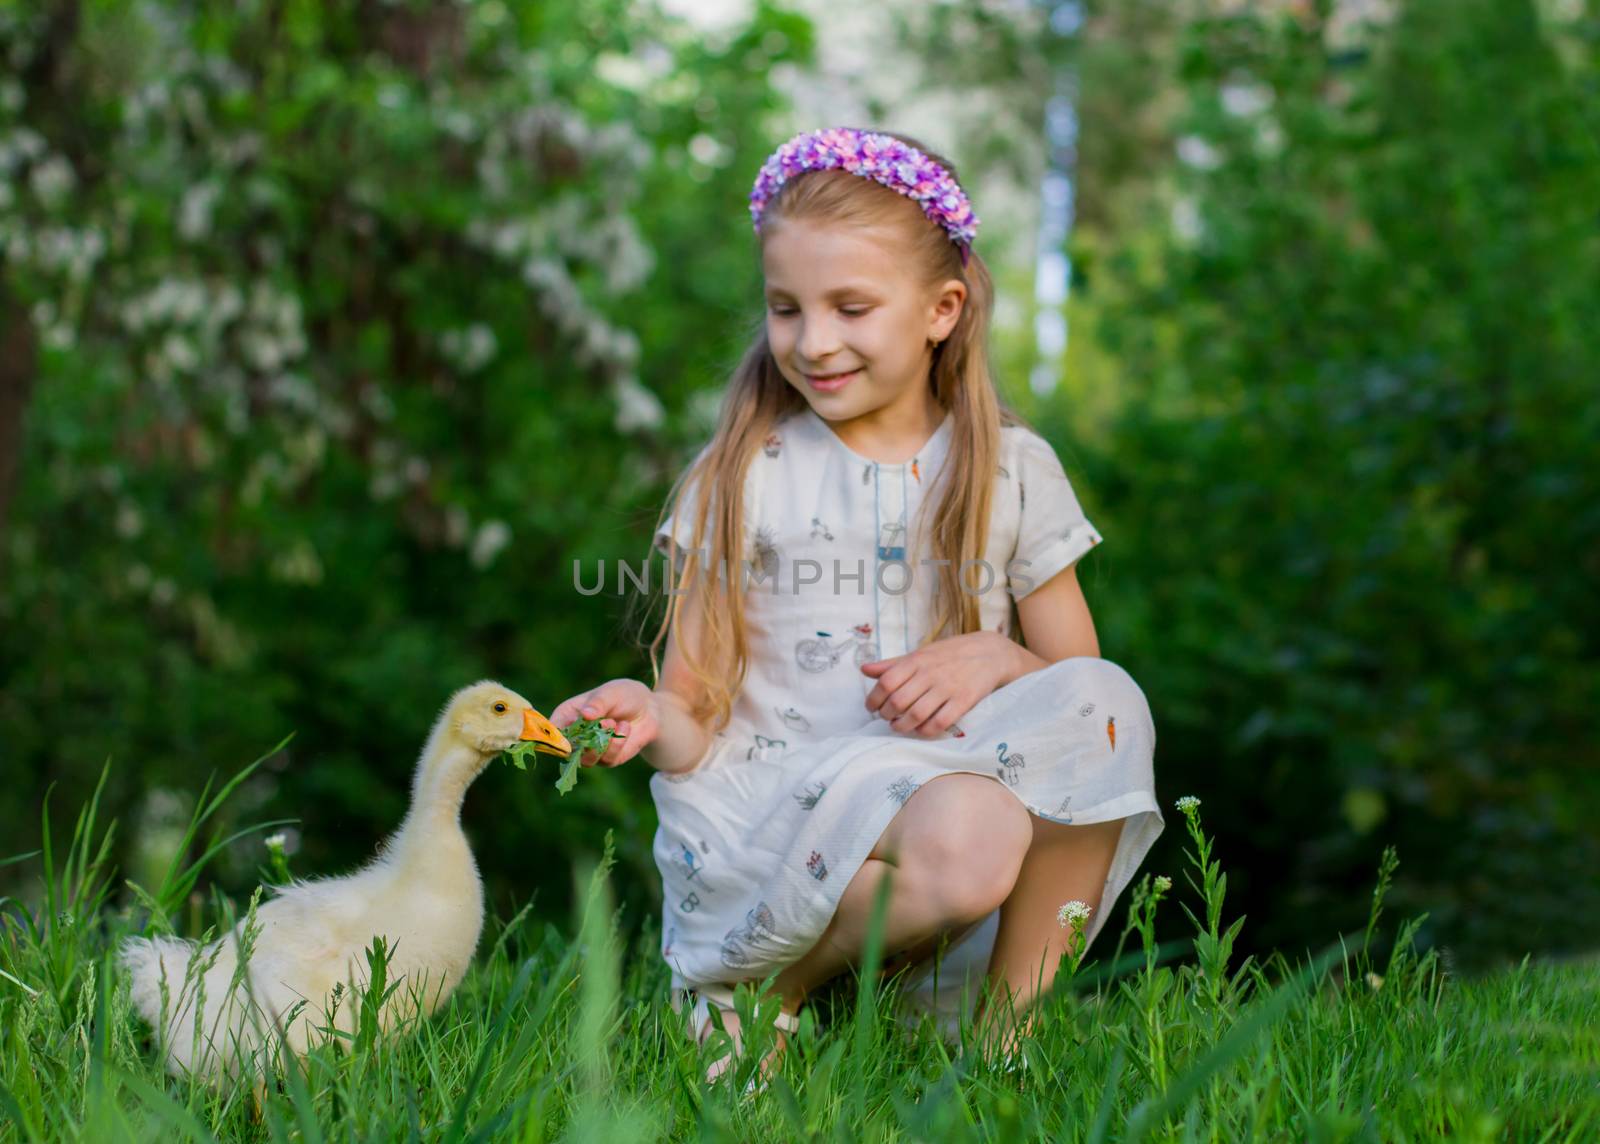 Girl feeding duckling with grass by Angel_a